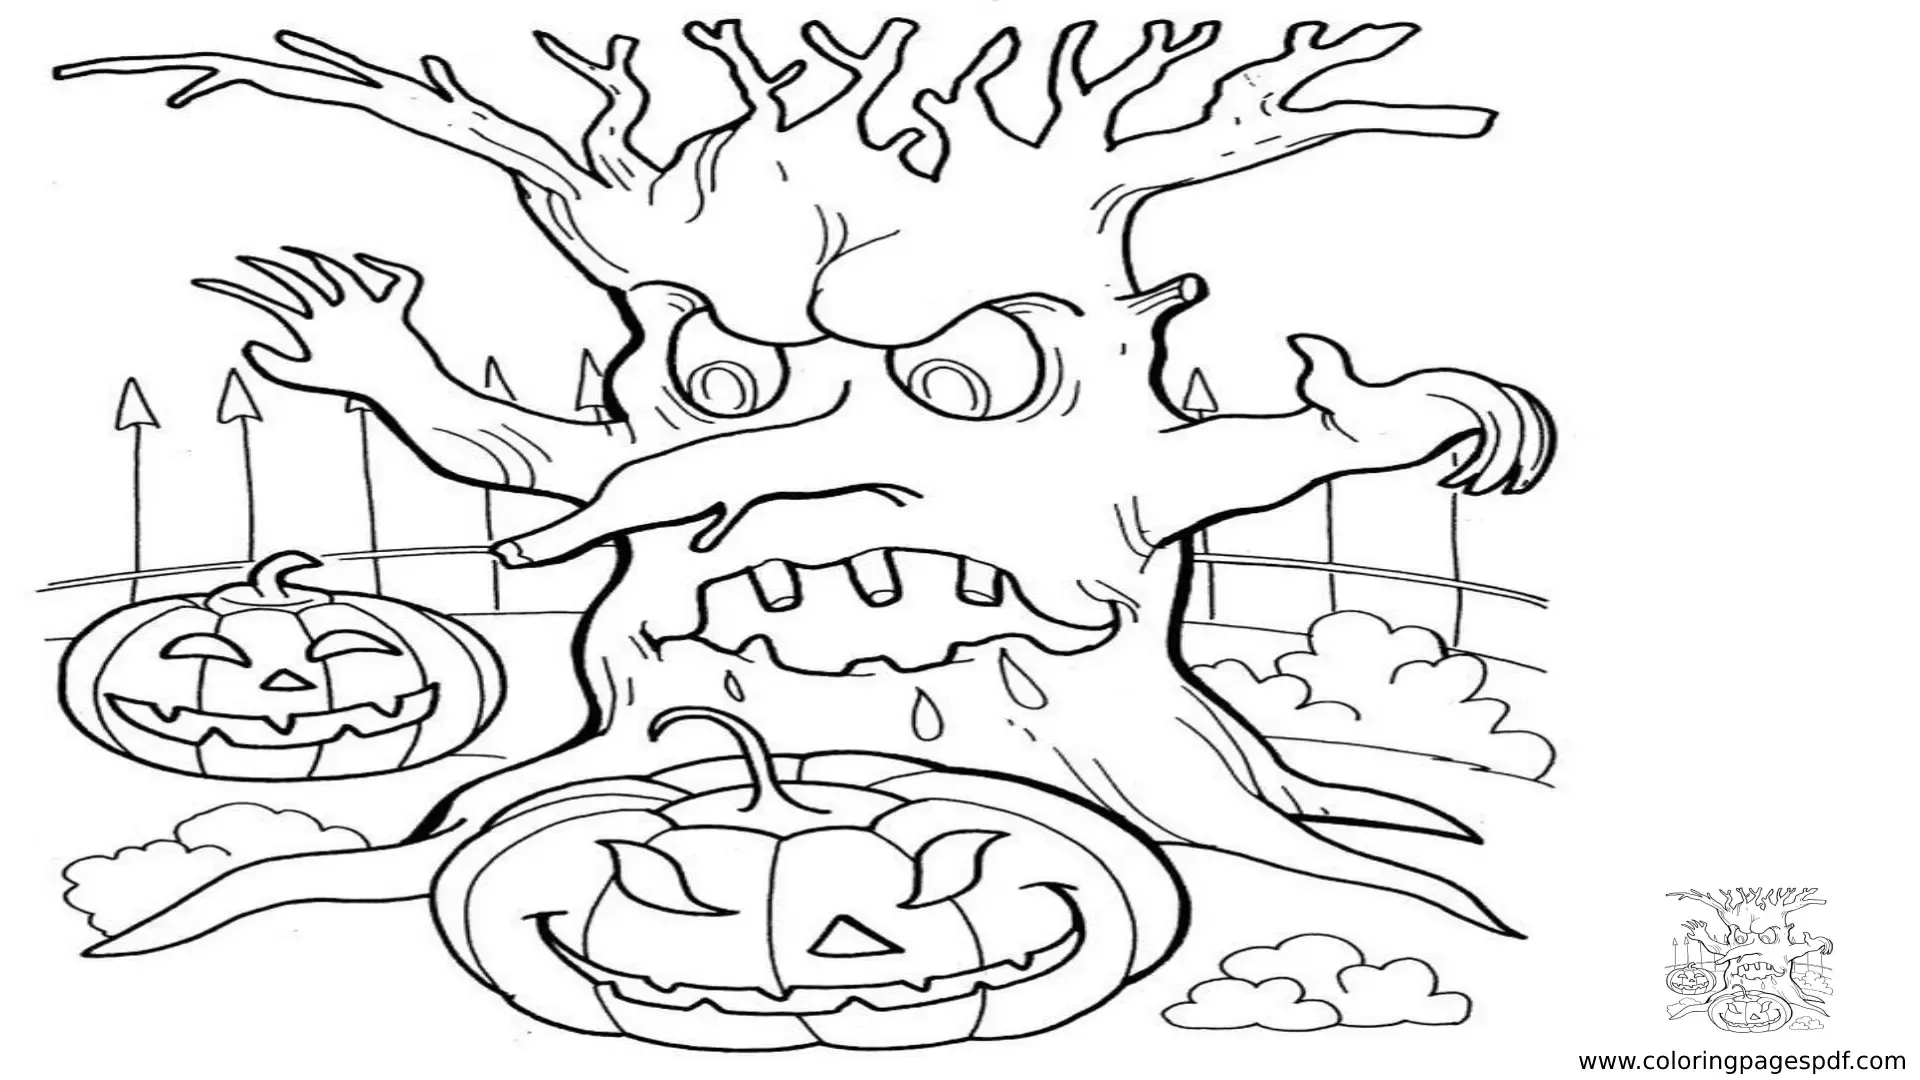 Coloring Page Of A Haunted Tree